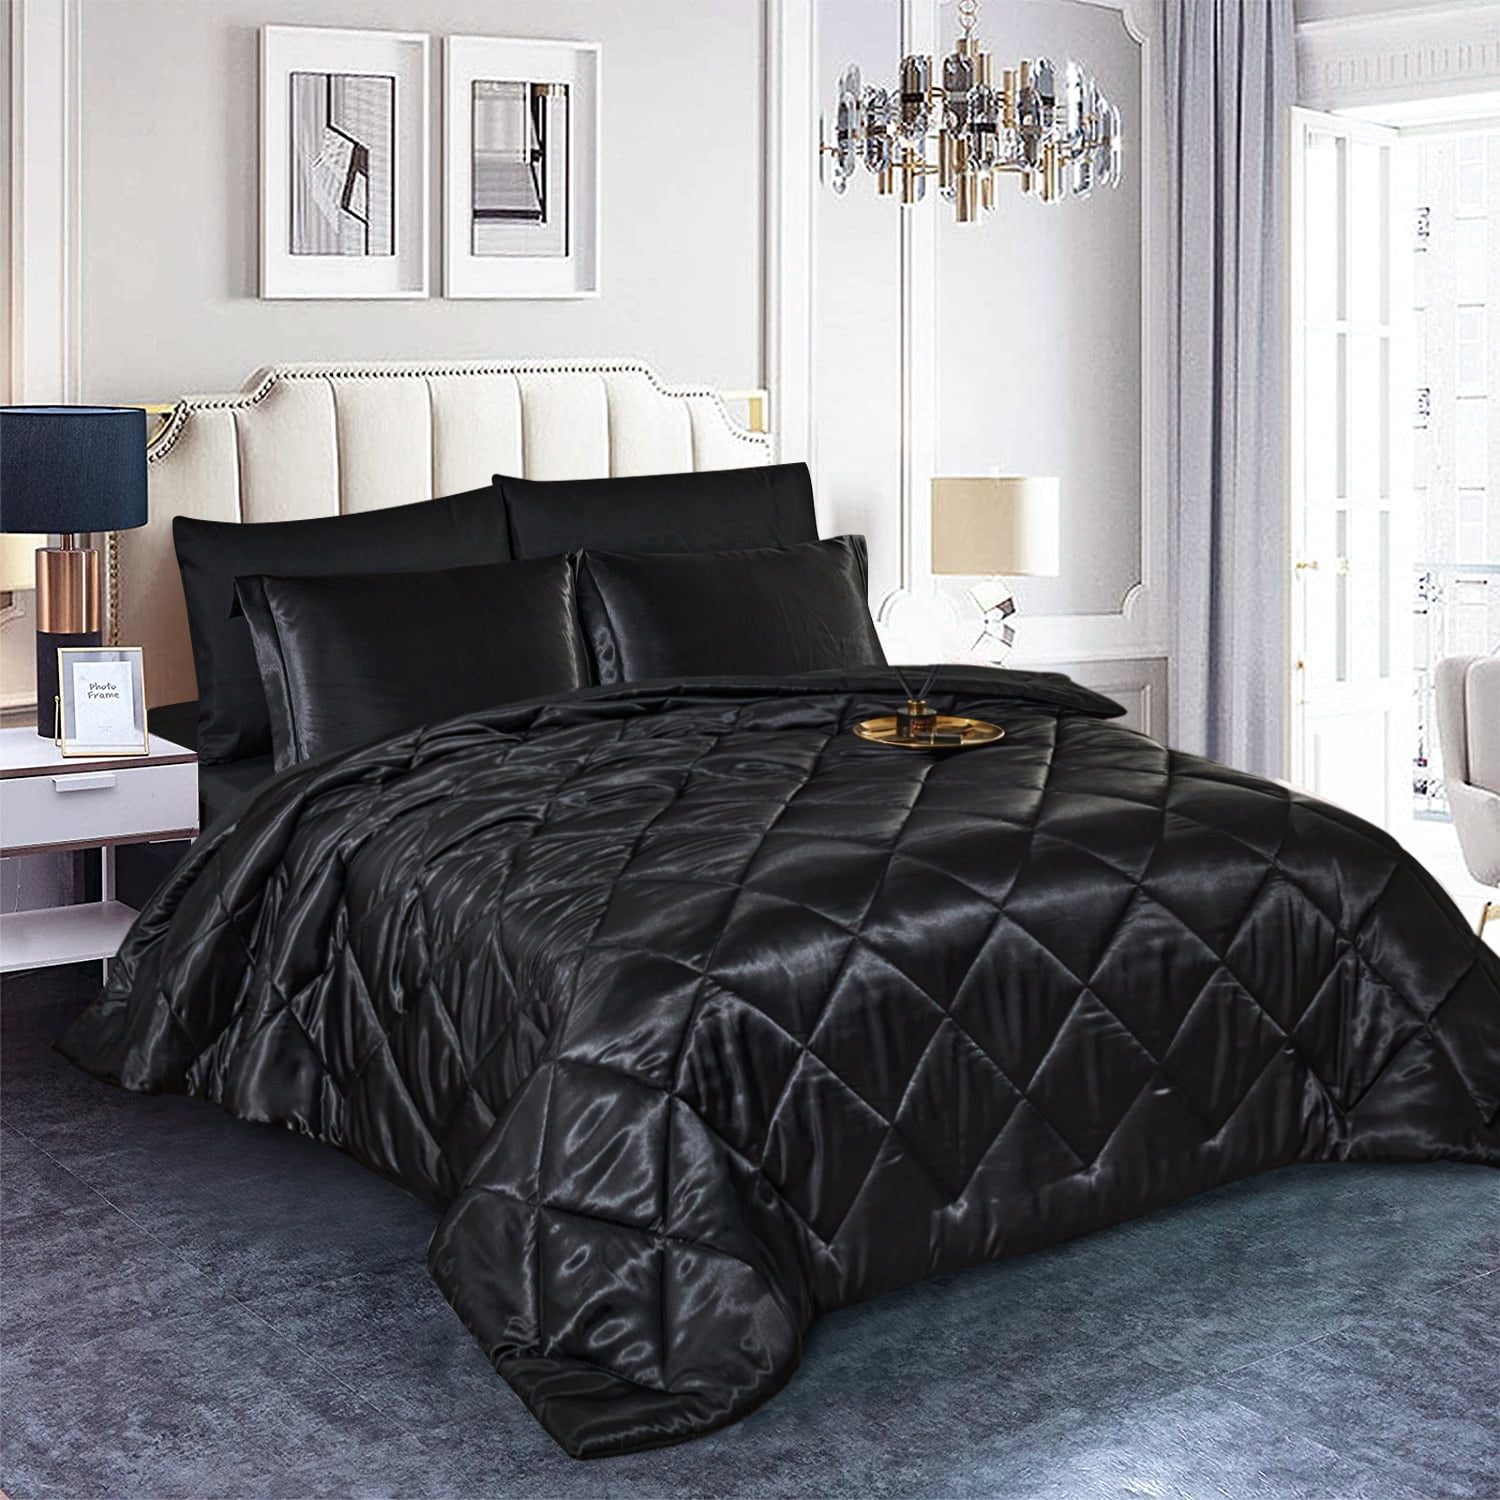 Jml 6 Piece Silky Satin Bed in A Bag Comforter Set with Sheets,Twin, Black